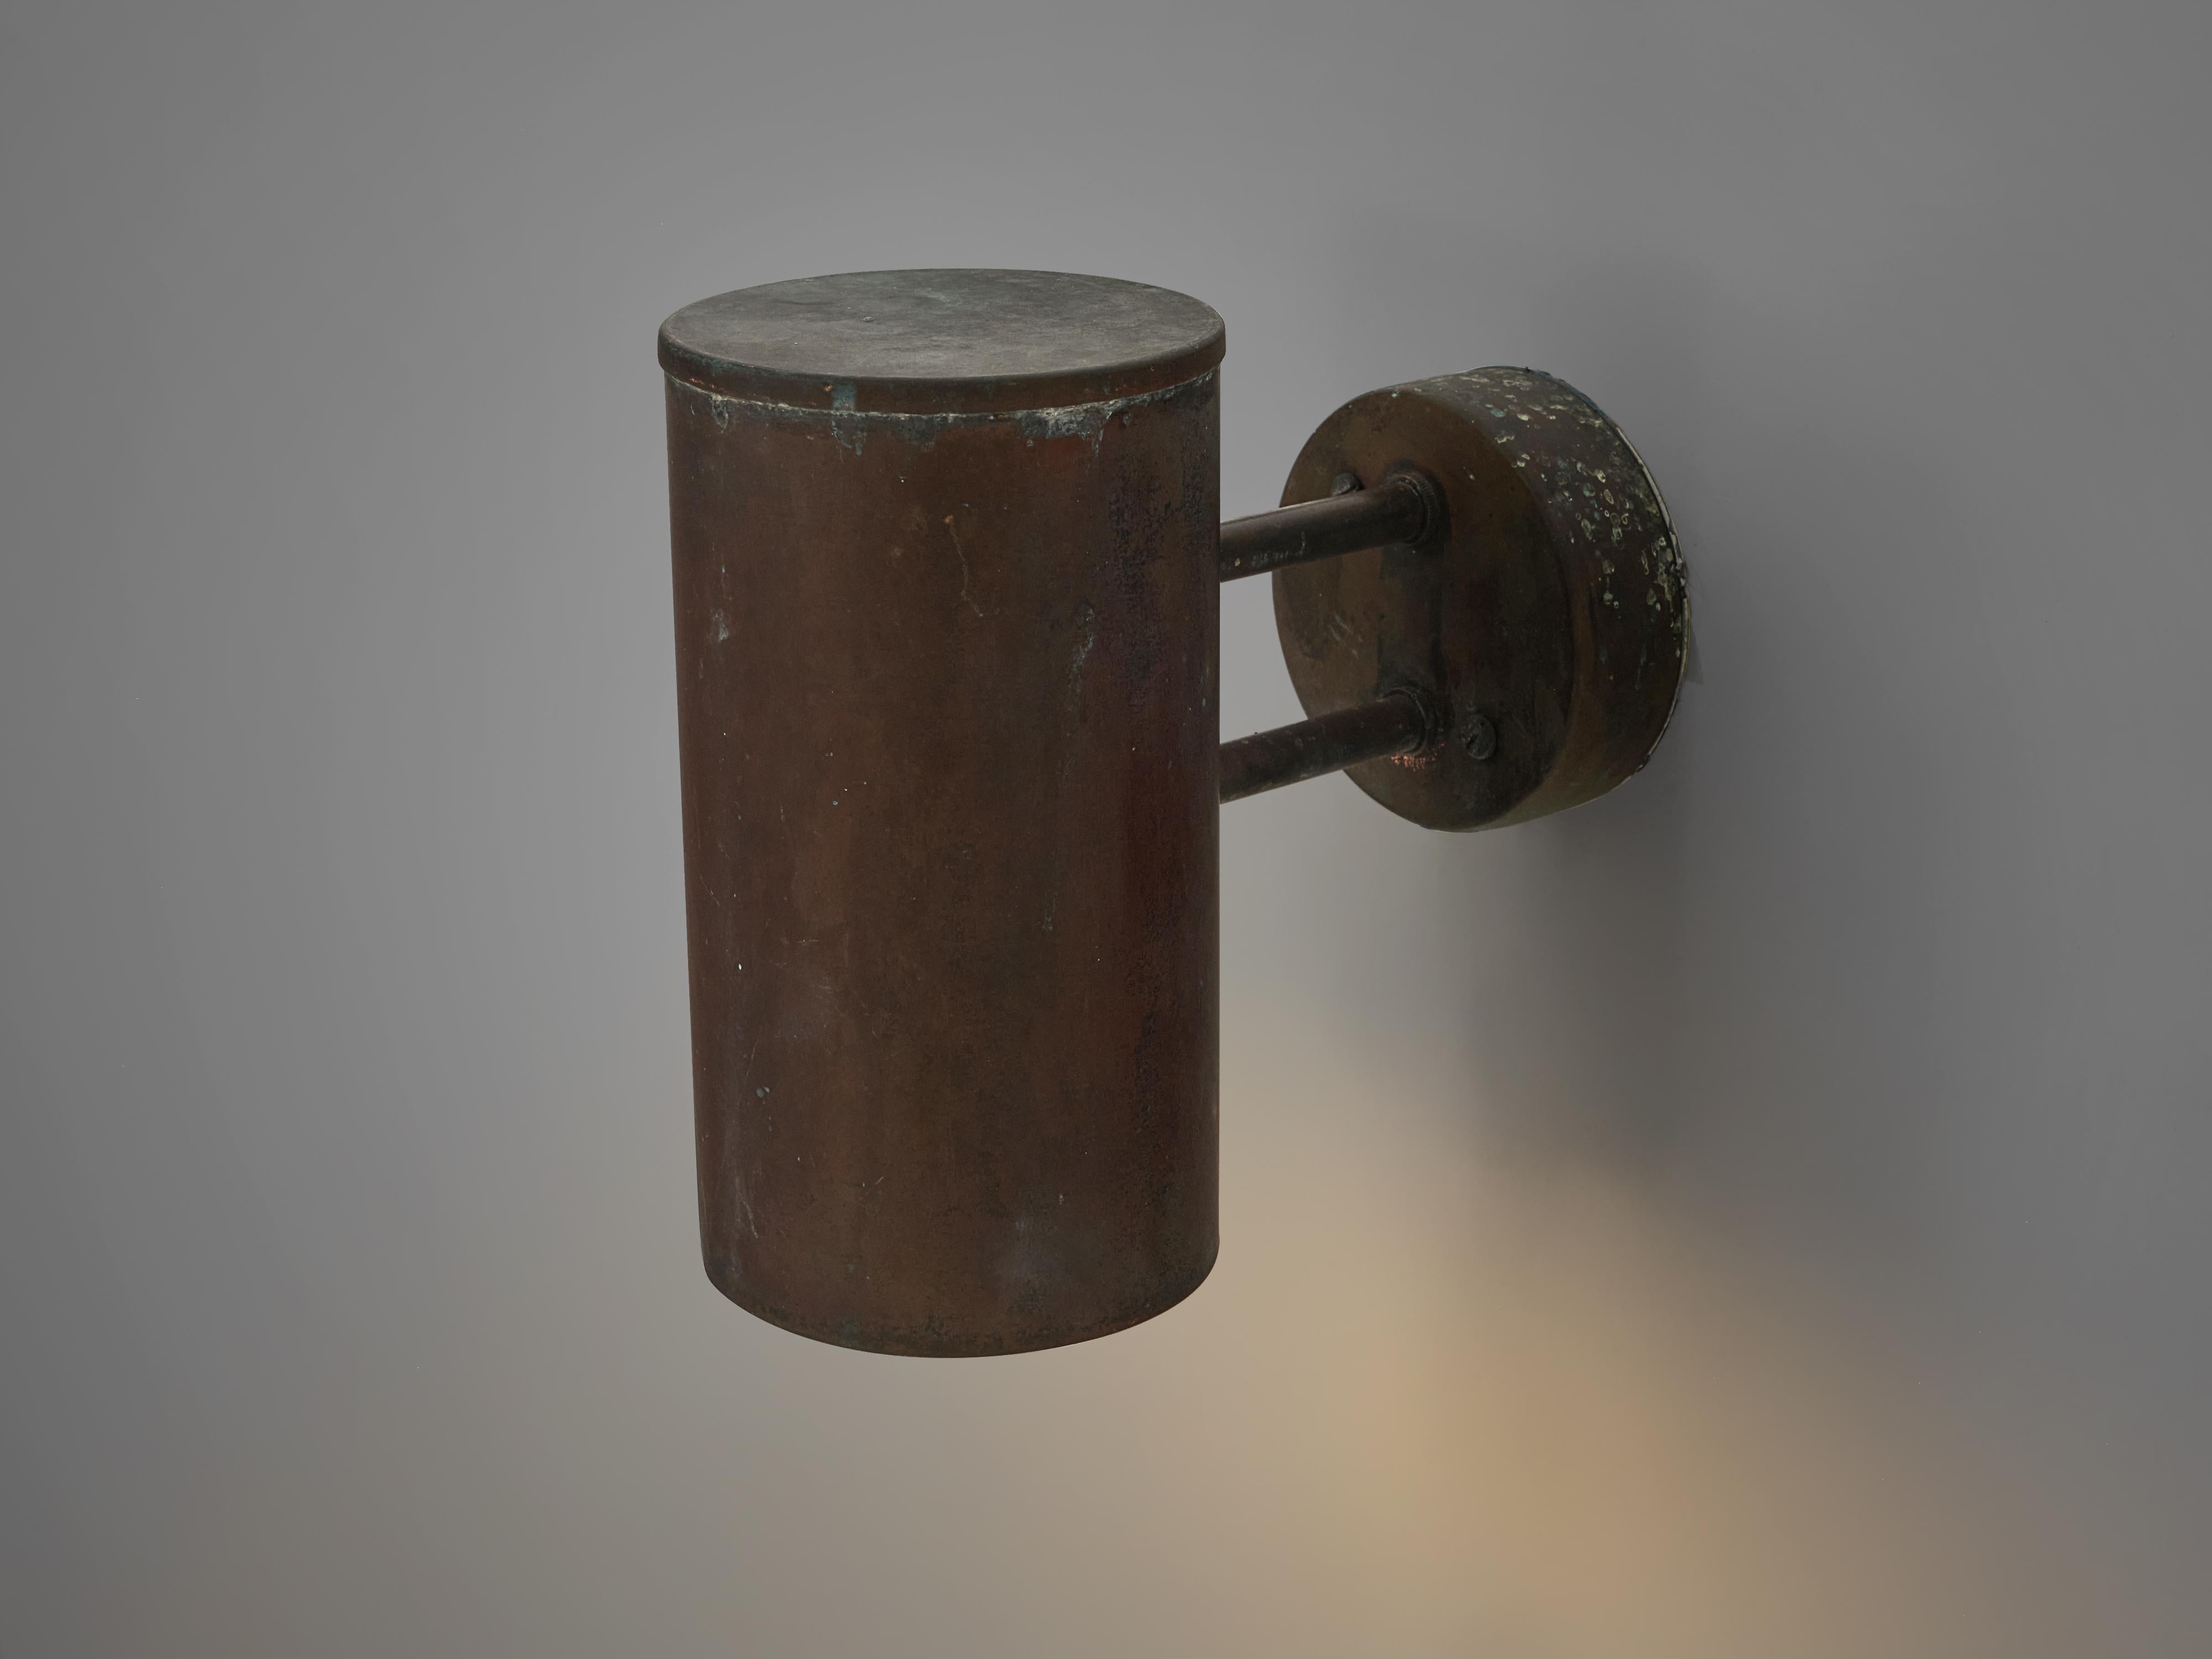 Scandinavian Modern Hans-Agne Jakobsson ‘Rulle’ Wall Lights in Patinated Copper